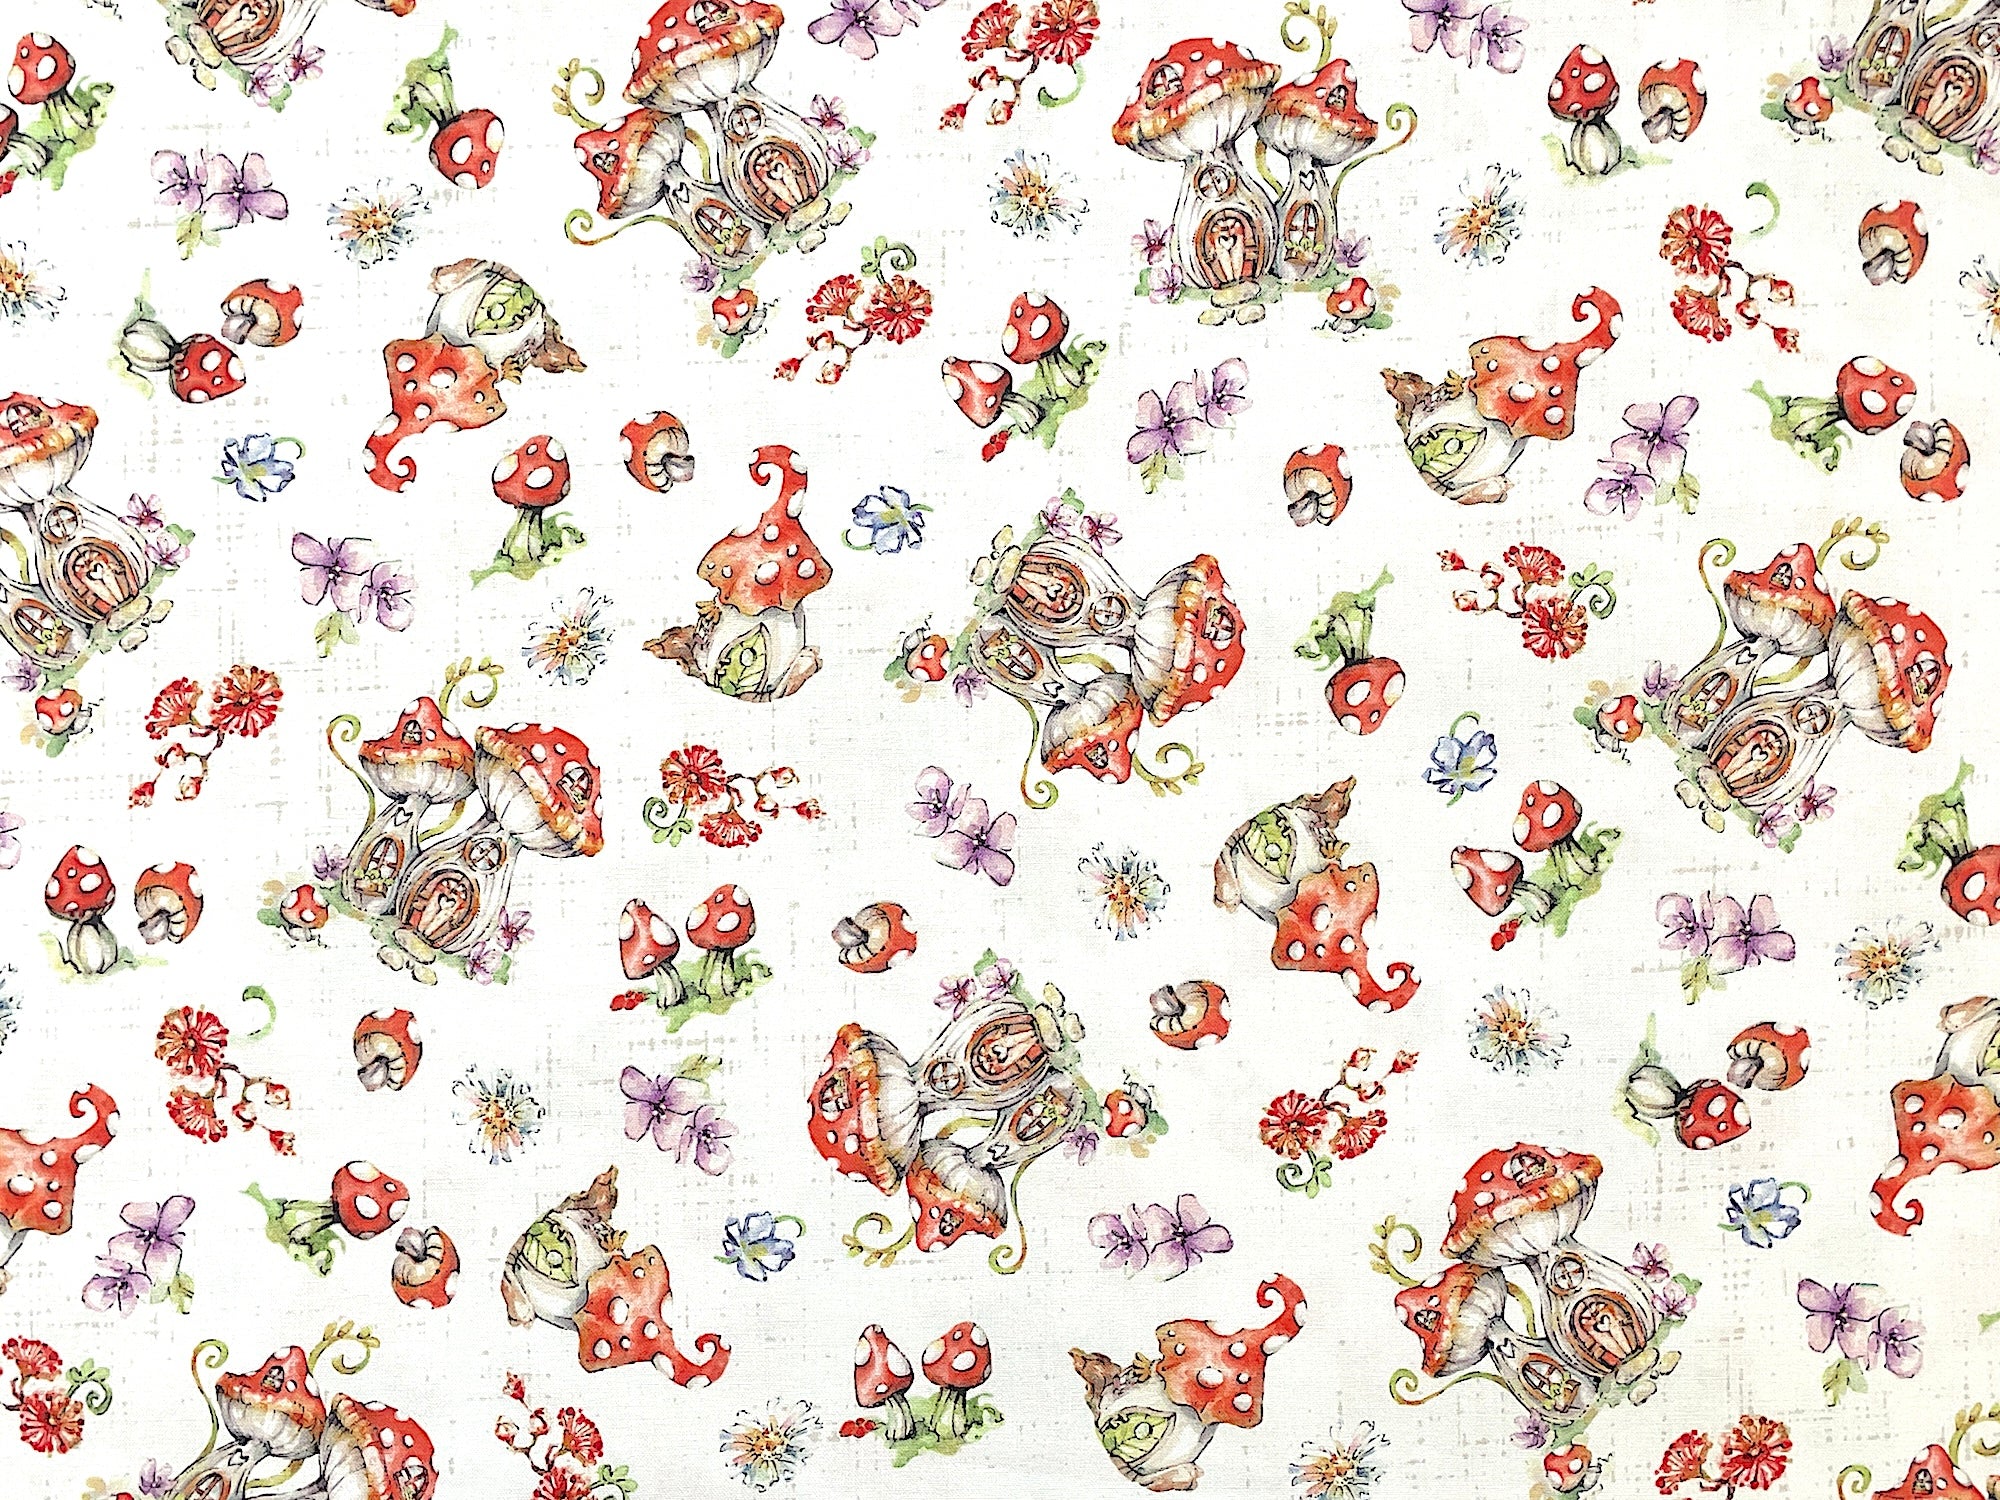 White cotton fabric covered with mushrooms, mushroom houses and flowers.